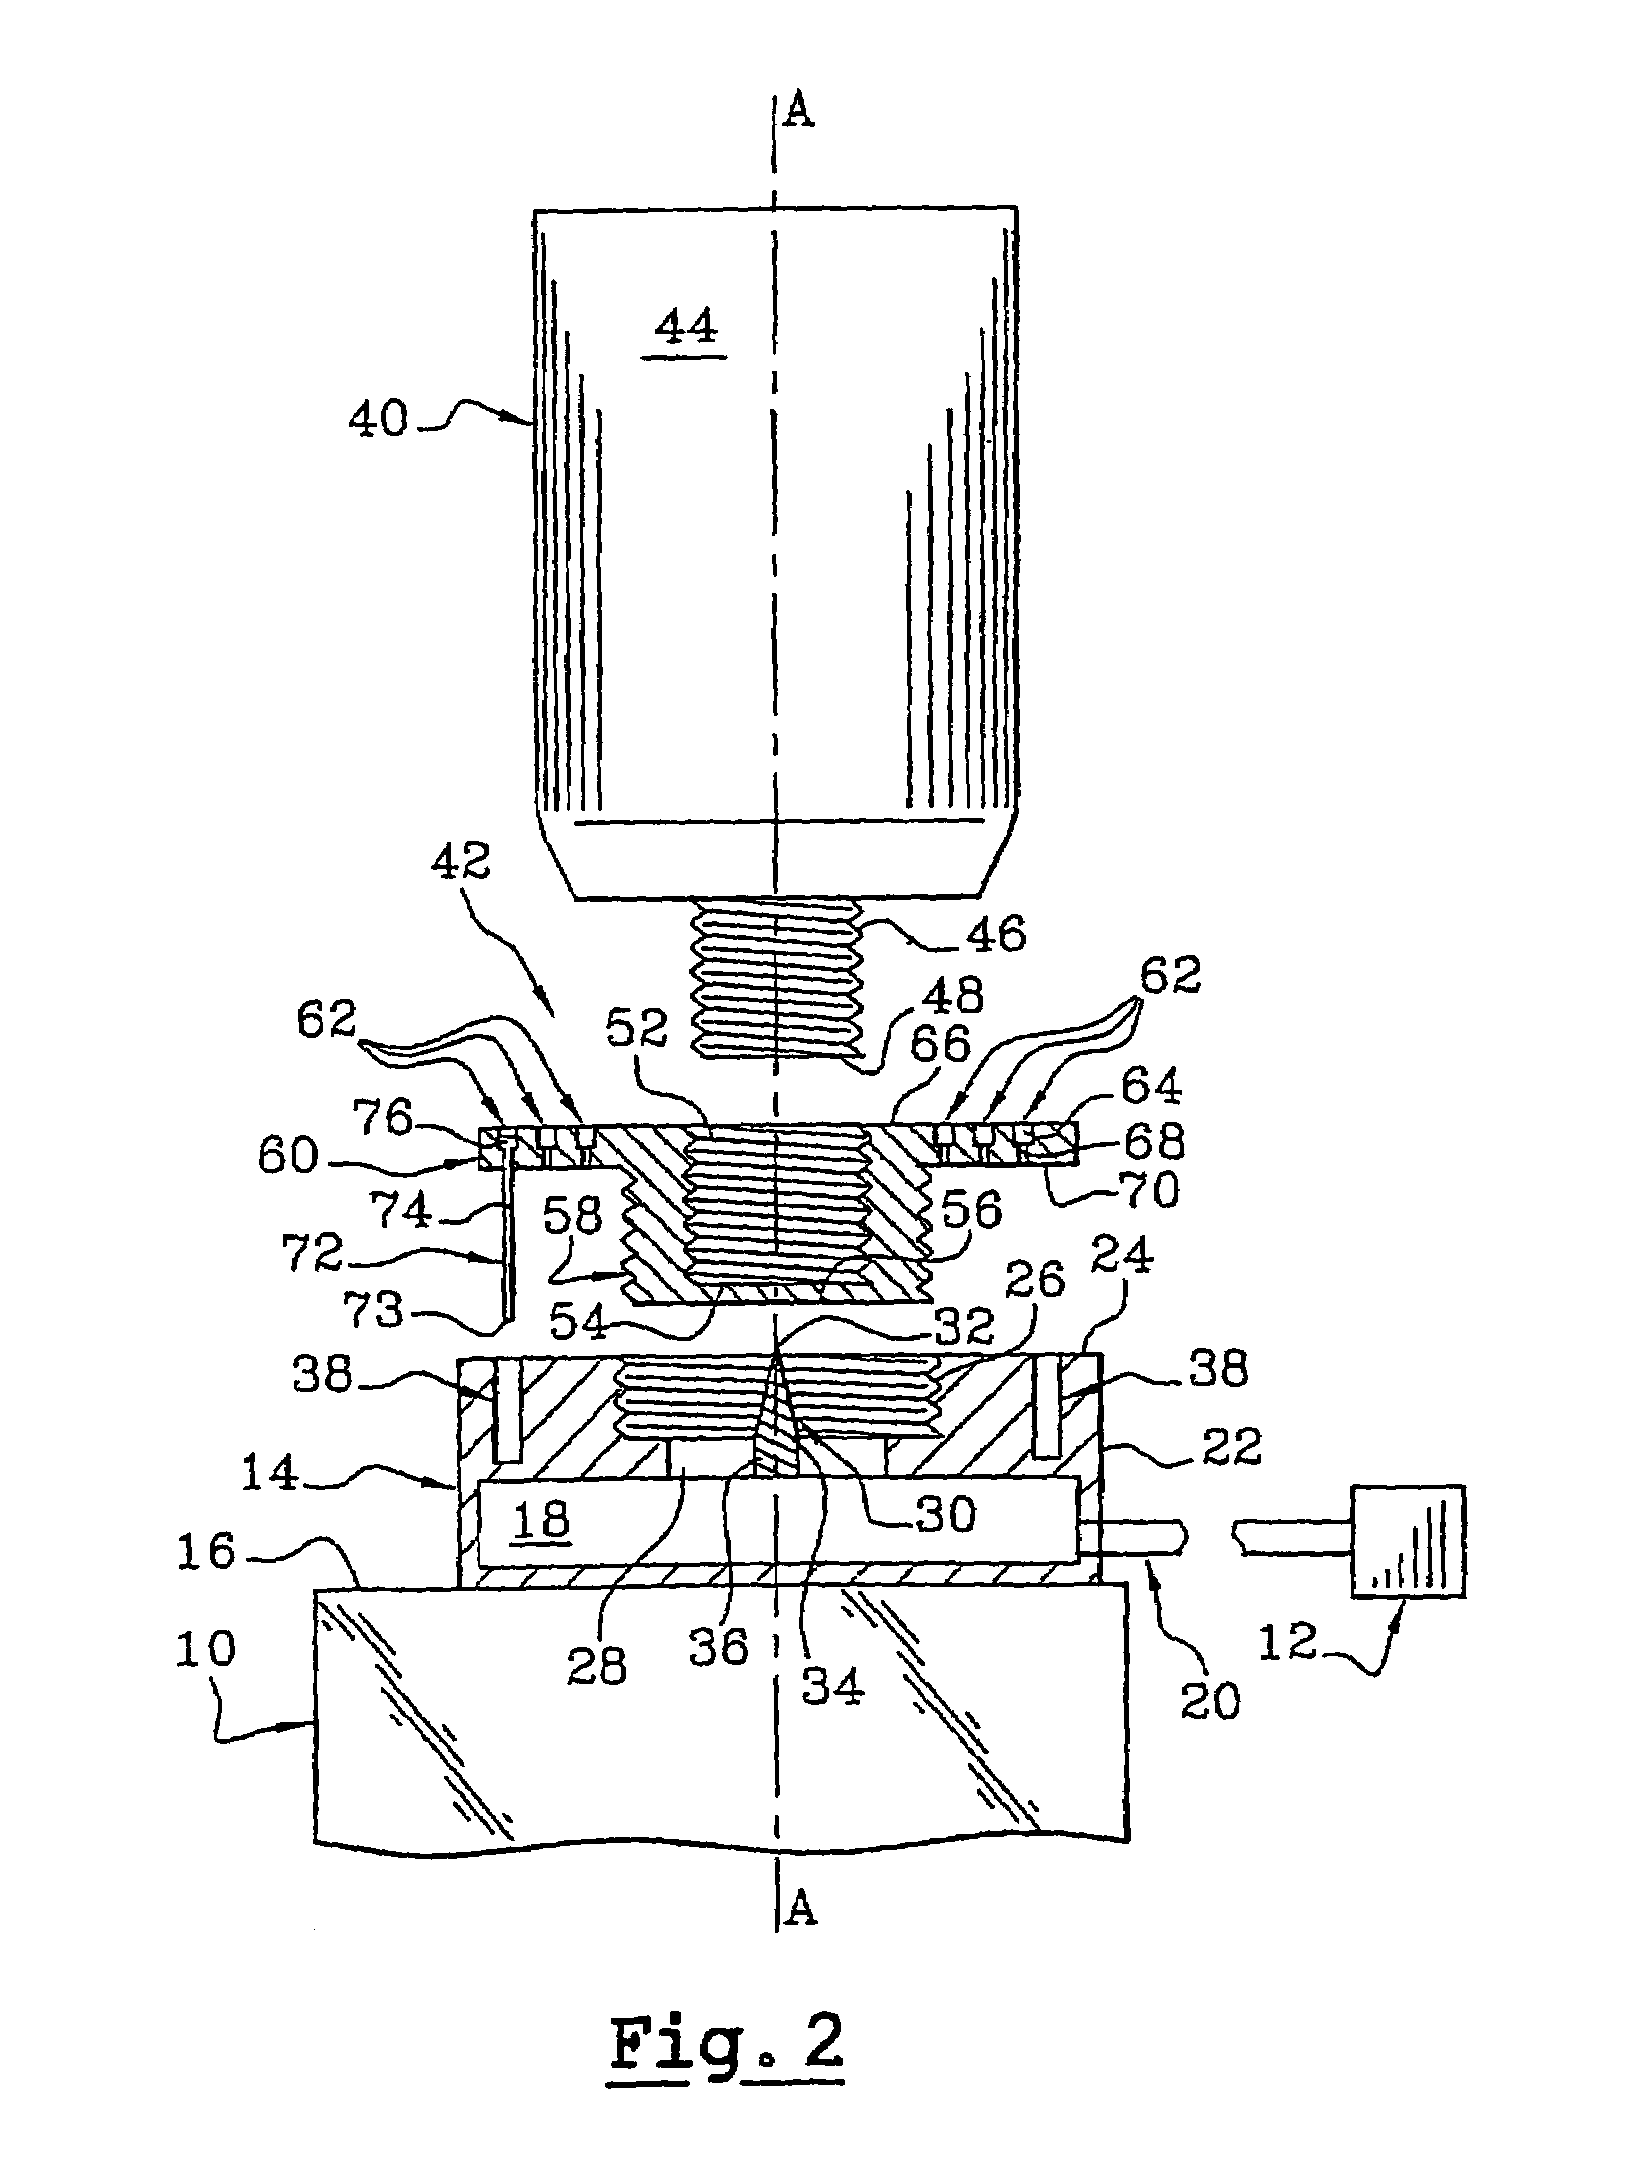 Machine fluid supply assembly comprising keying means